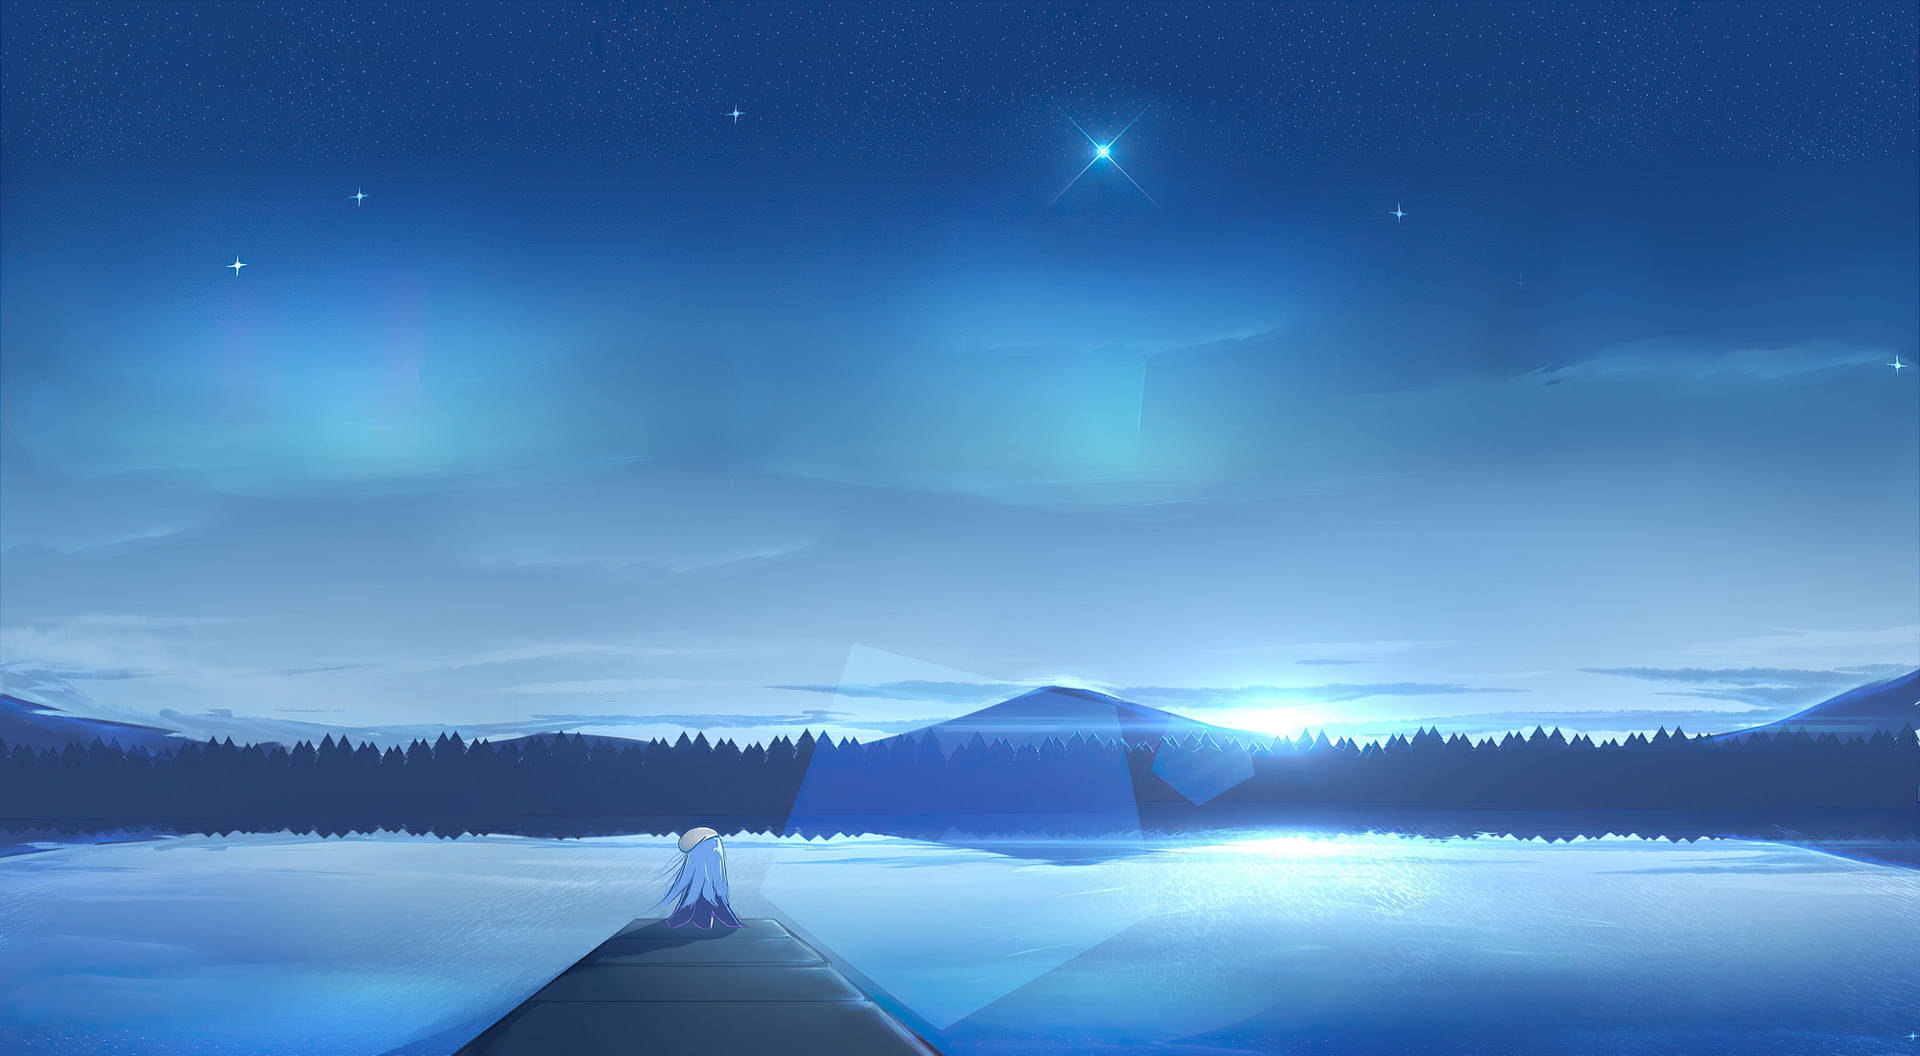 Animation Anime Girl At Pier With Lake And Mountains Wallpaper